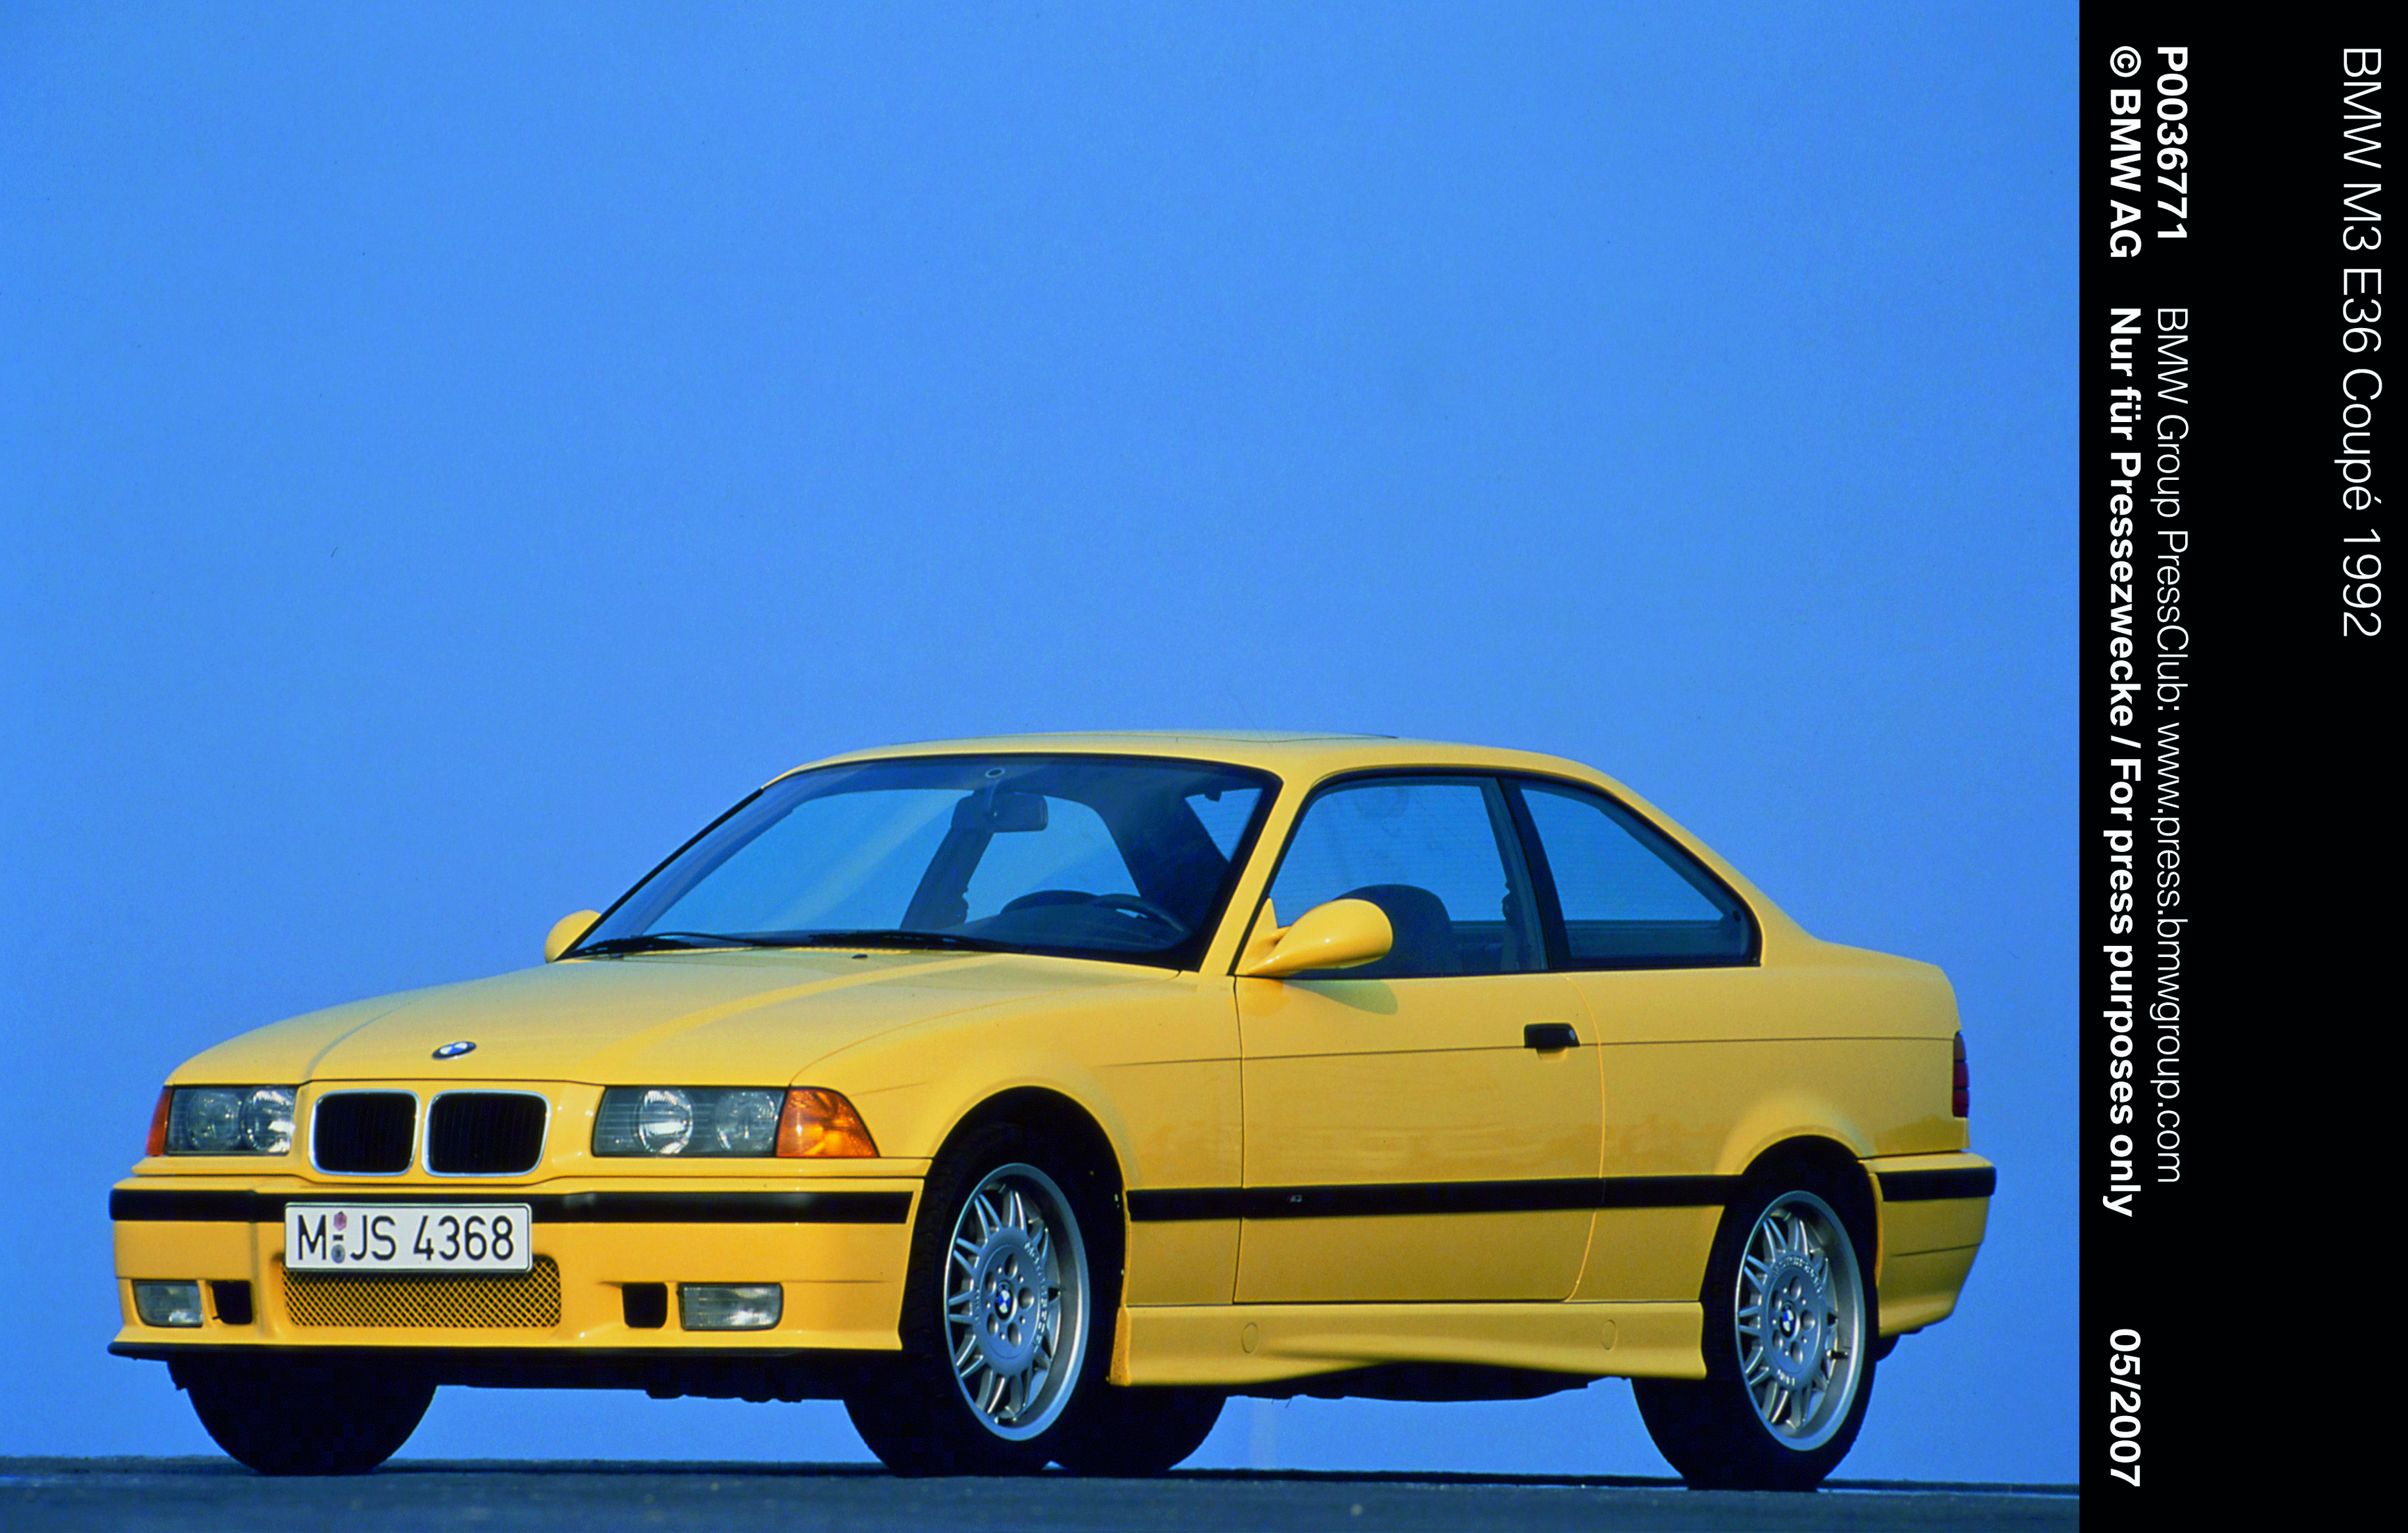 Used car buying guide: BMW M3 E36 (1992-1999)